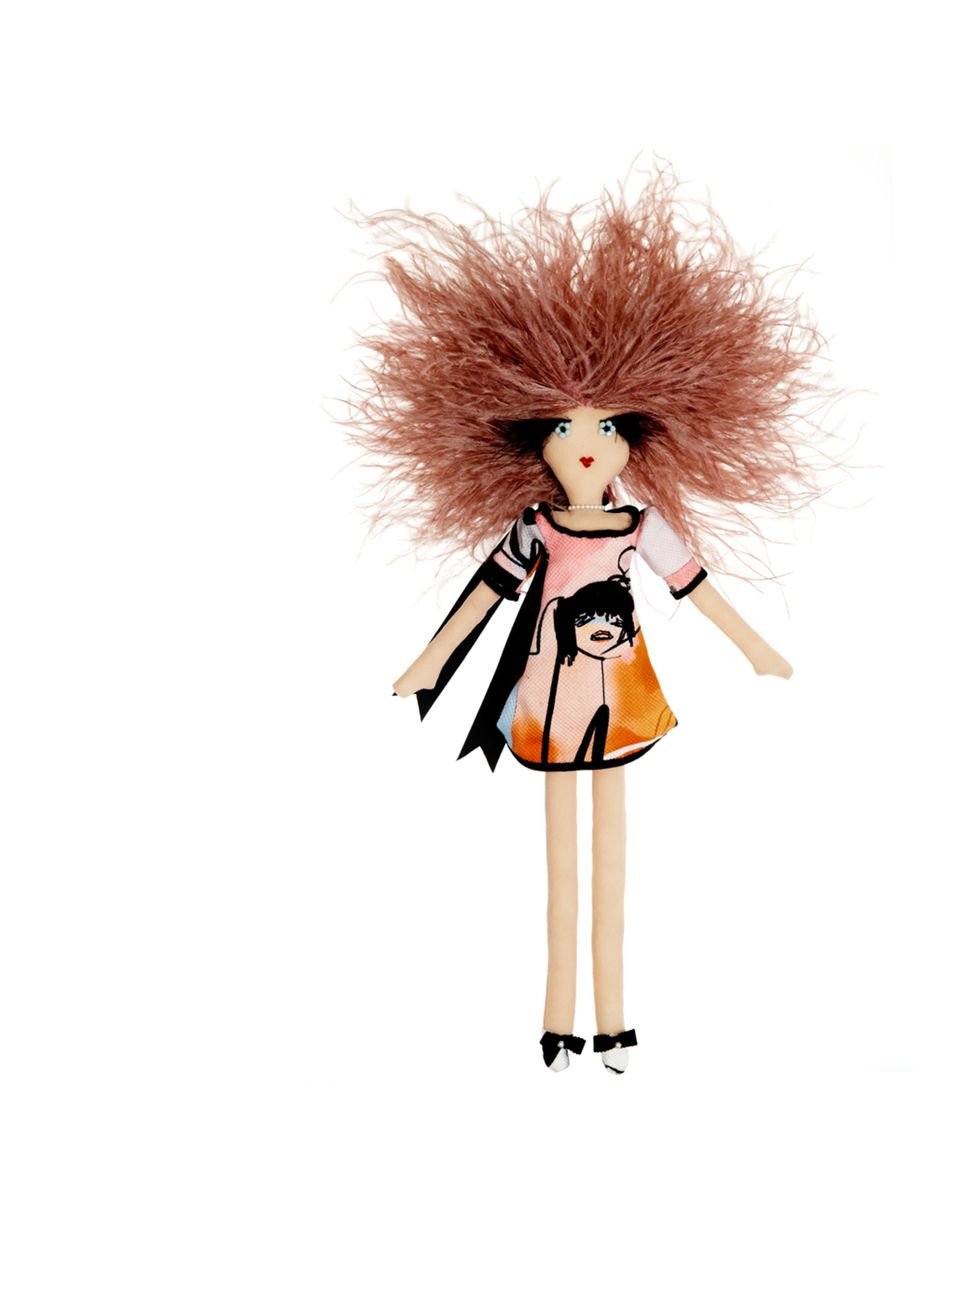 <p>GIles for Matches handmade Rag Doll, £500, at <a href="http://www.matchesfashion.com/?type=home">Matches</a></p>